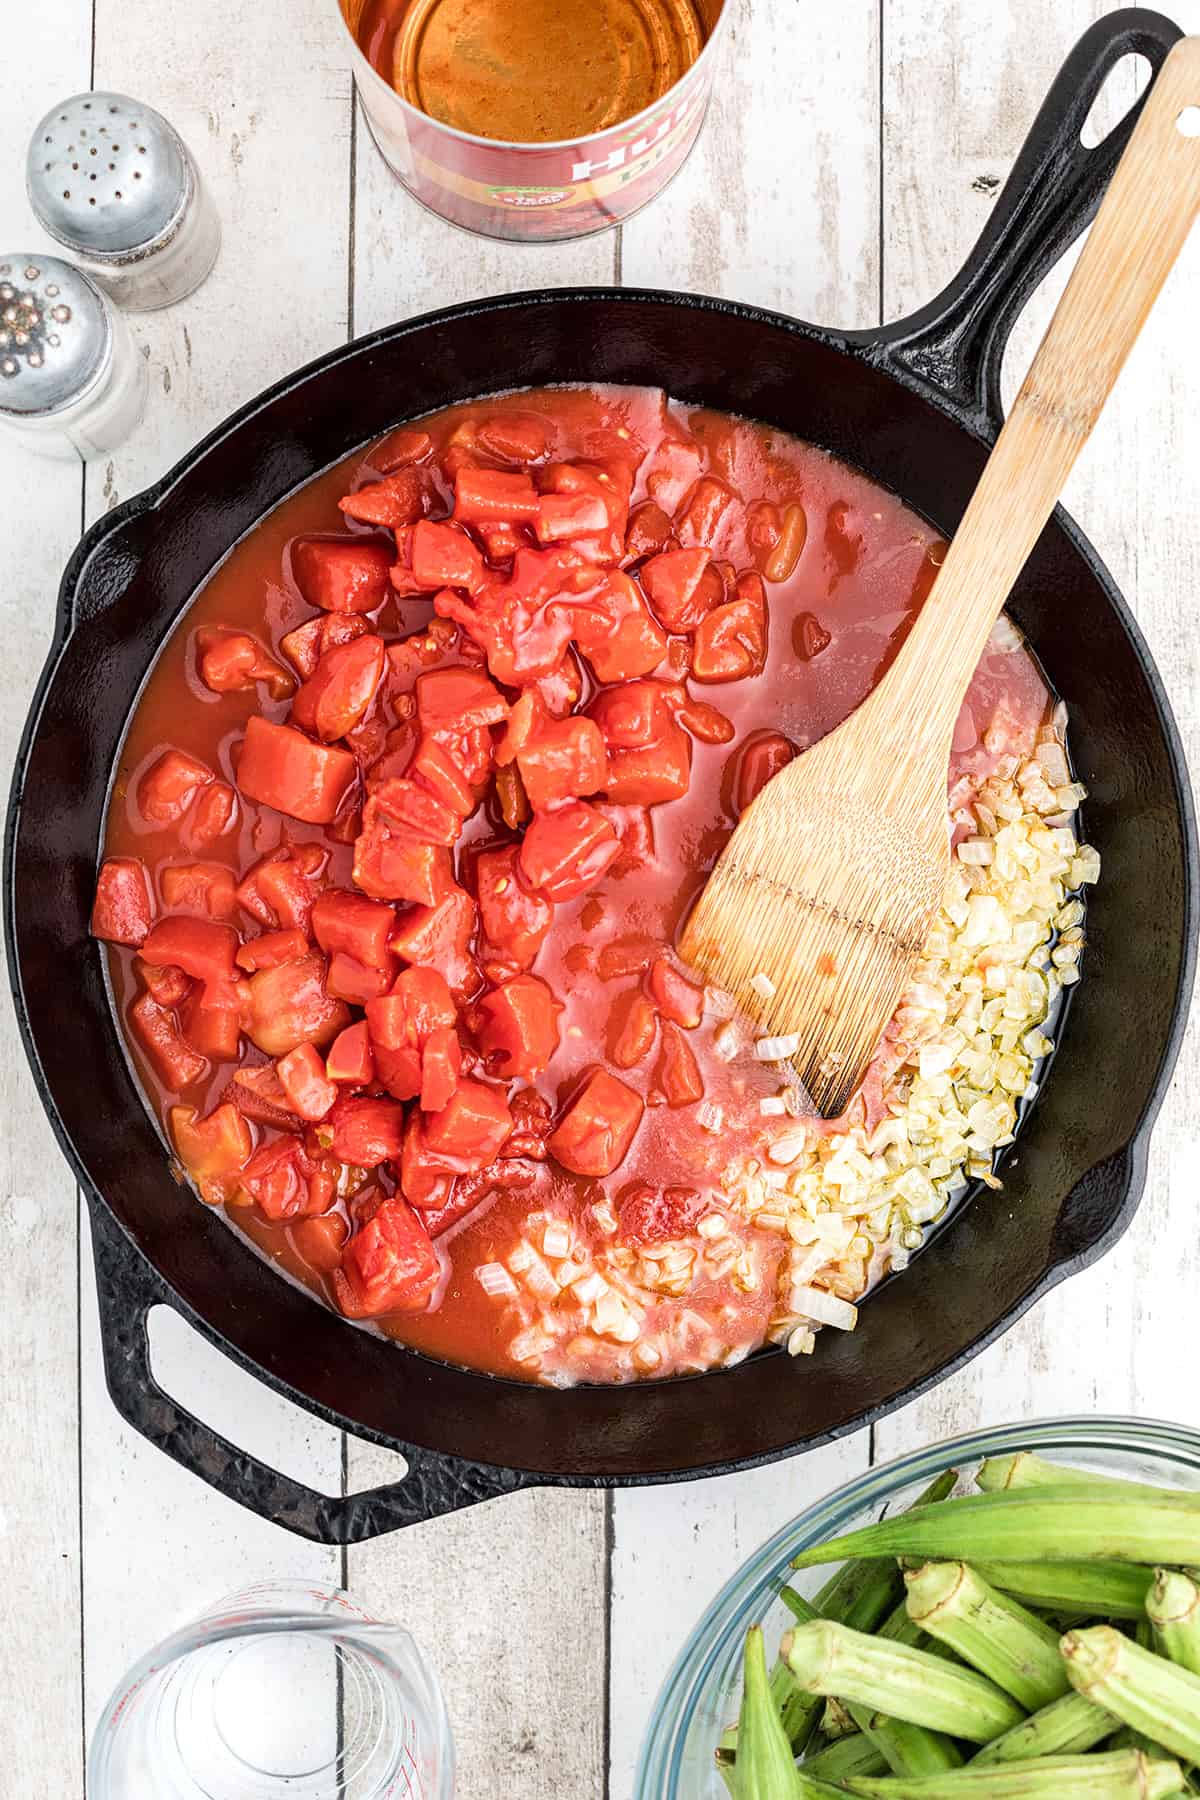 Diced tomatoes added to skillet.